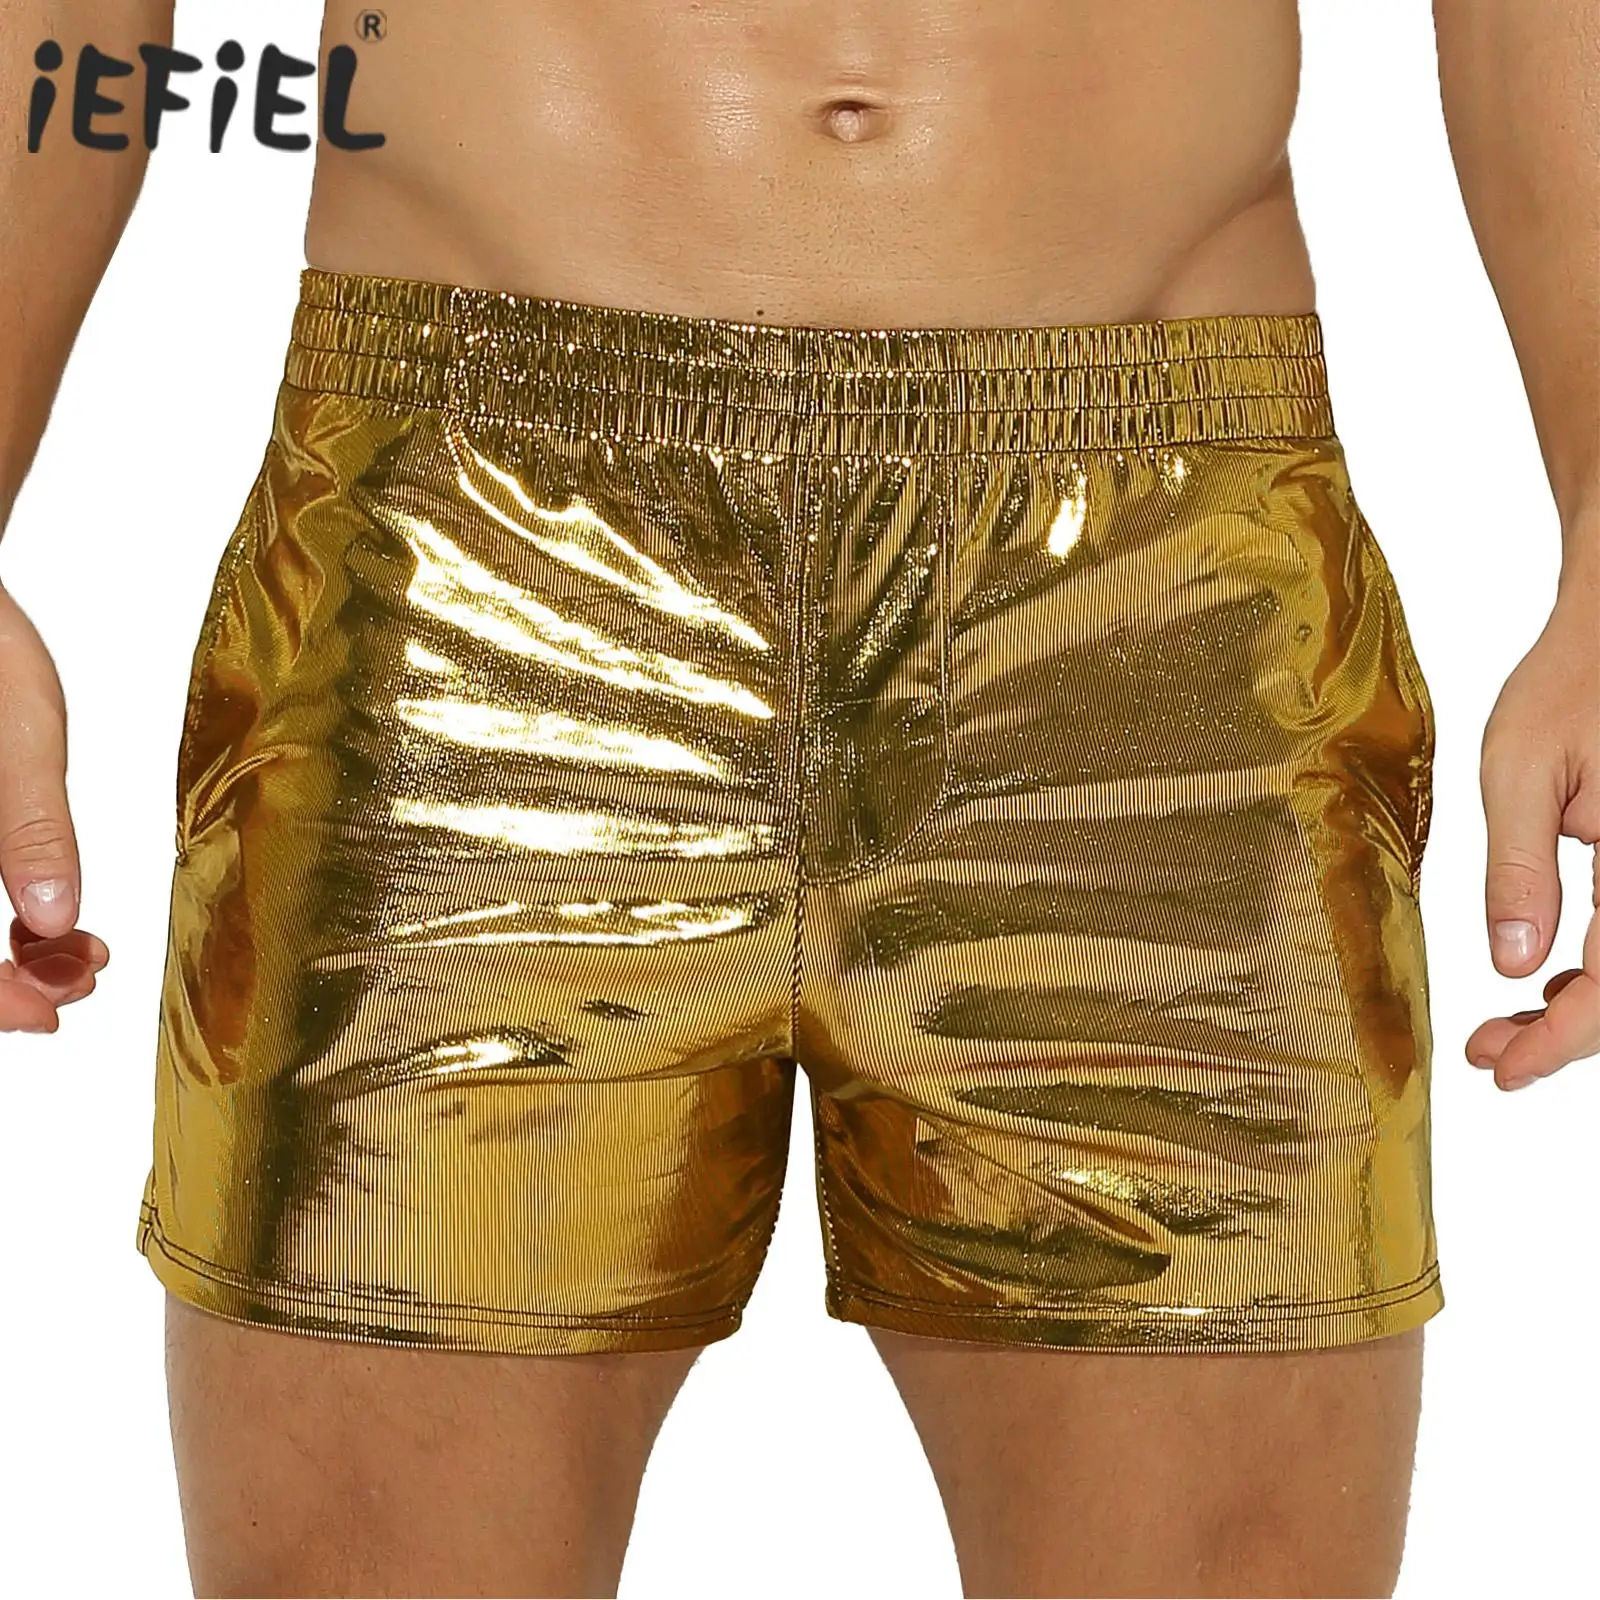 Mens Shiny Low Rise Short Pants with Pockets Faux Leather Hot Shorts Clubwear for Pole Dancing Music Festival Rave Outfit summer women black shiny patent leather open zipper crotch low rise latex shorts female clubwear rave sexy mini shorts